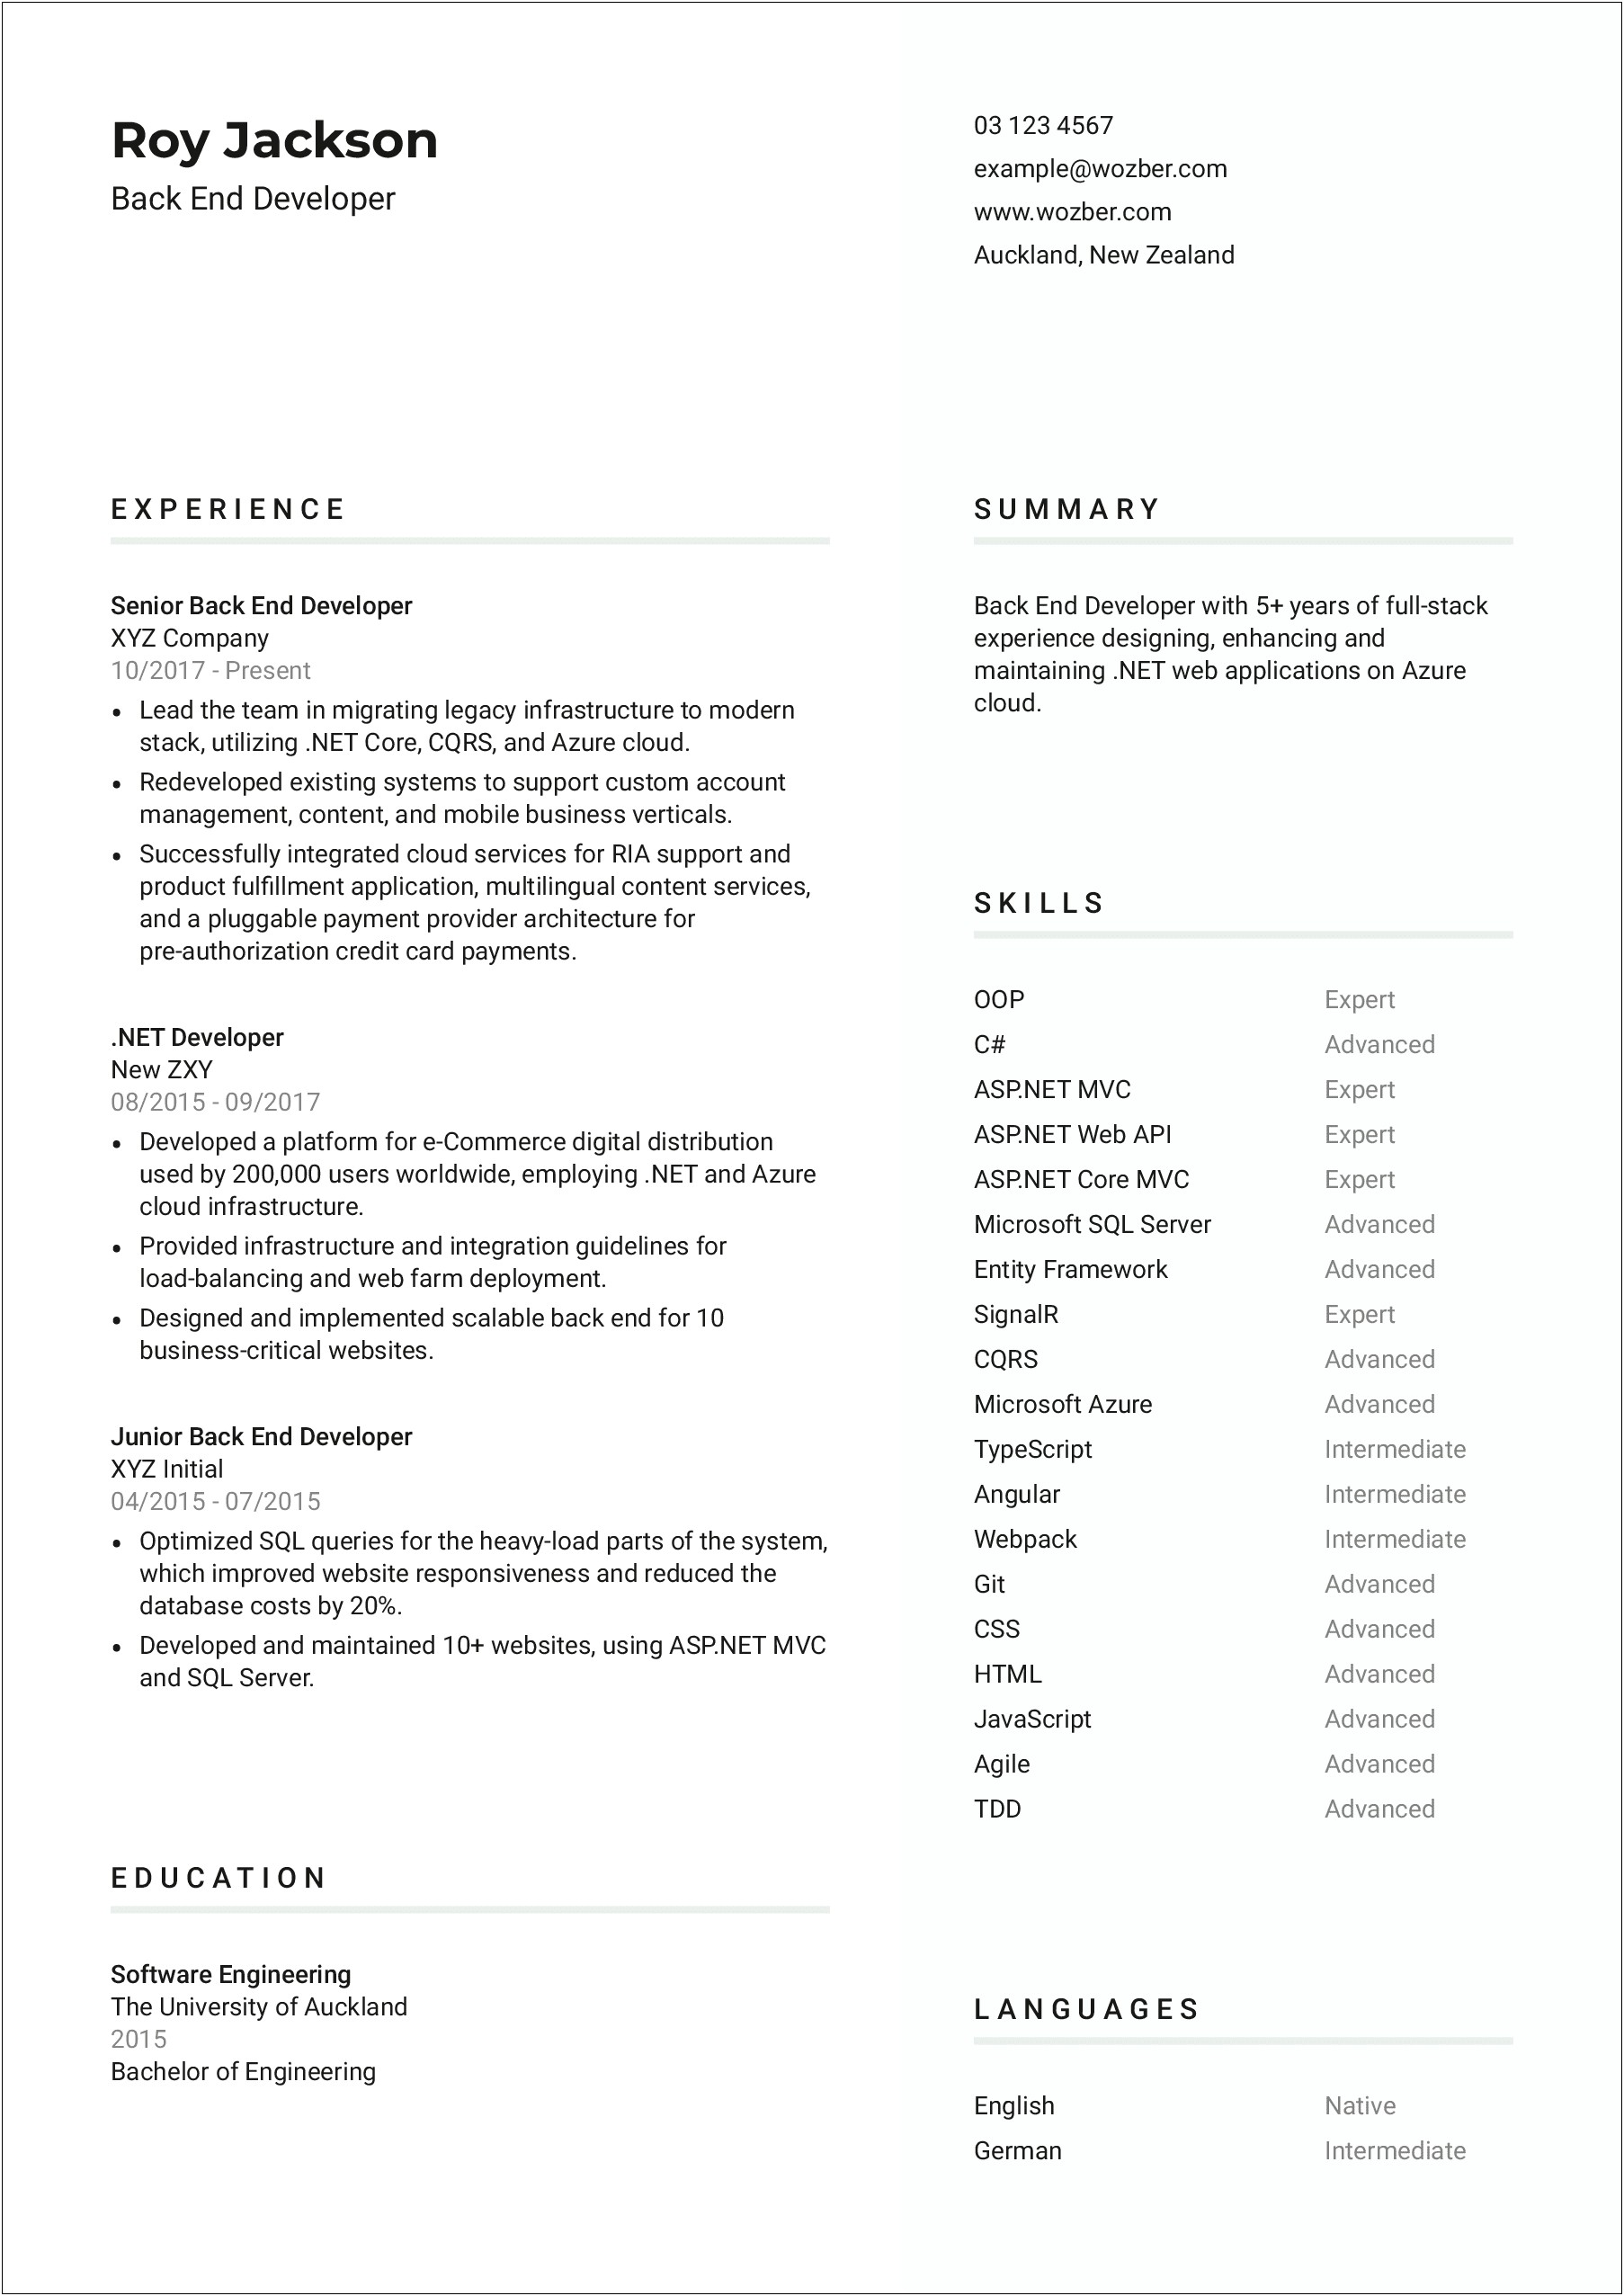 10 Year Experience Resume Format For Developer